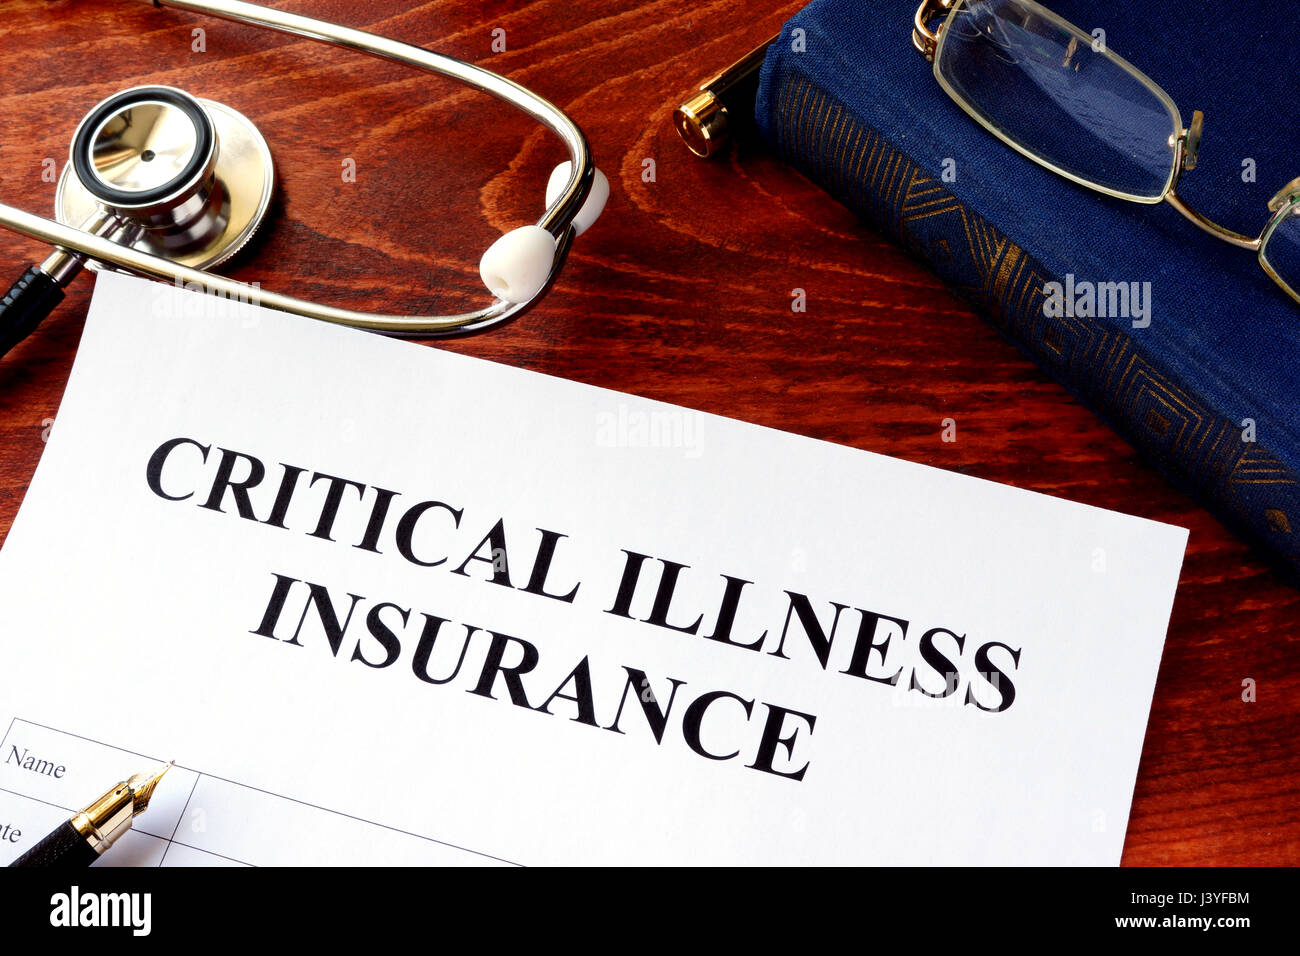 Critical illness insurance policy at the table. Stock Photo